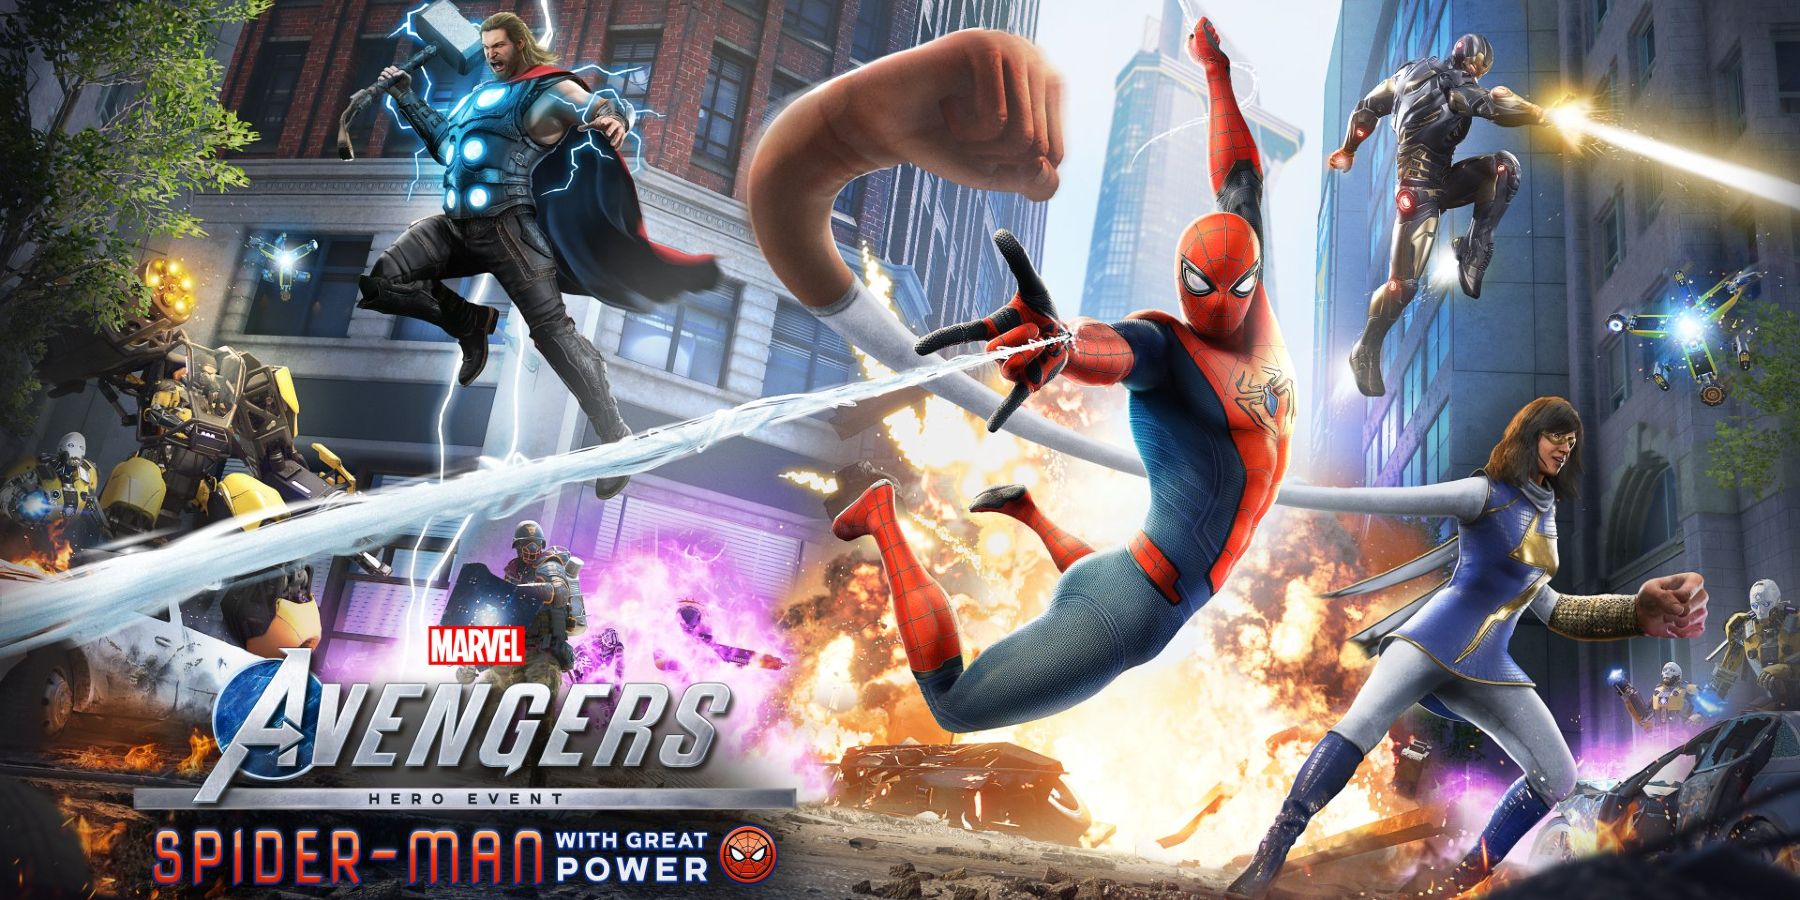 marvel's avengers spider-man official key art with great power dlc image